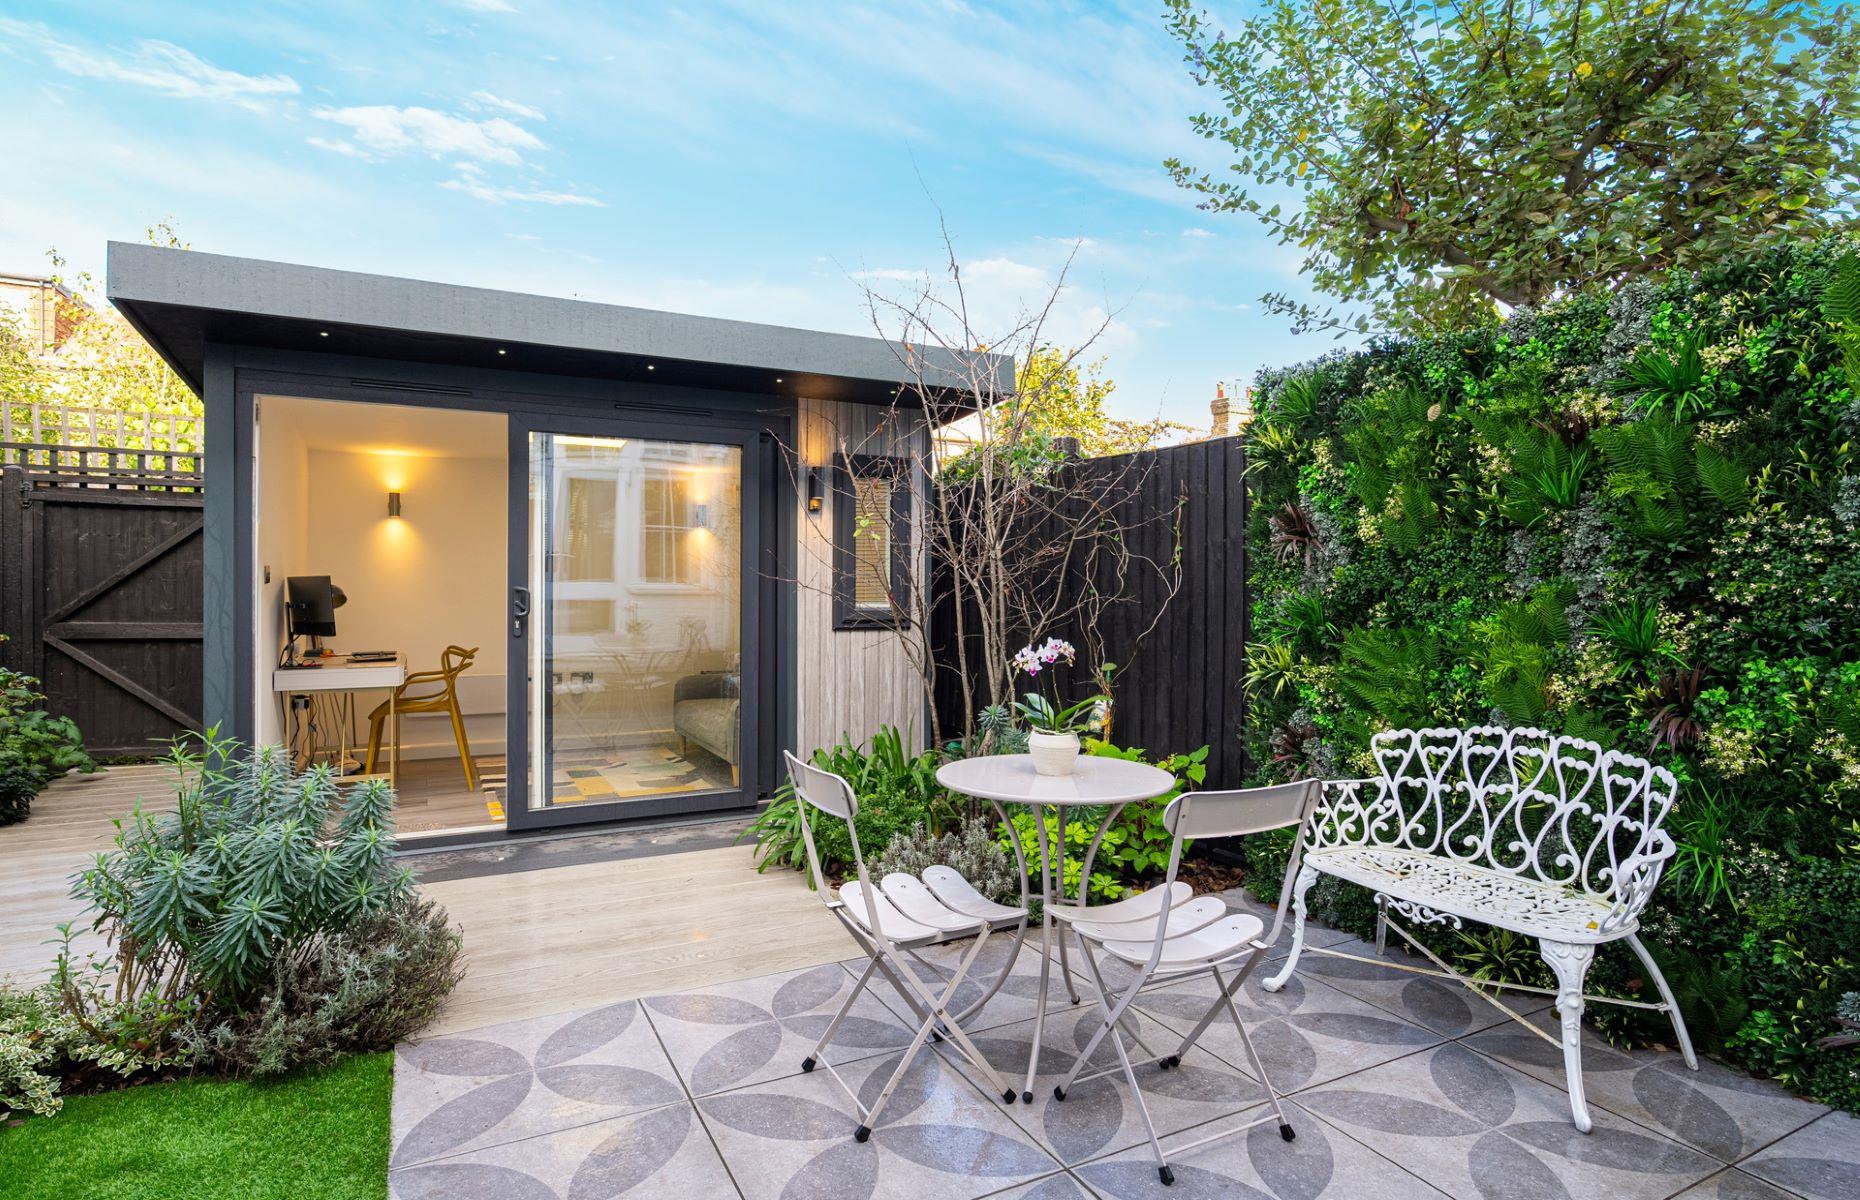 <p>If you have the space, then a garden room could be the ideal way of adding more usable space to your home. Granny flats, ADUs and <a href="https://www.loveproperty.com/gallerylist/86179/gorgeous-garden-rooms-that-youll-fall-in-love-with">garden rooms</a> don’t generally require planning permission and they can be designed to be versatile. For example, you could create a home office that doubles as a guest suite, or a teenage den that's also a gym. Garden pods are a great option for those with limited space. Plus, their unique organic shape and quirky interiors can add real wow factor to an outside space.</p>